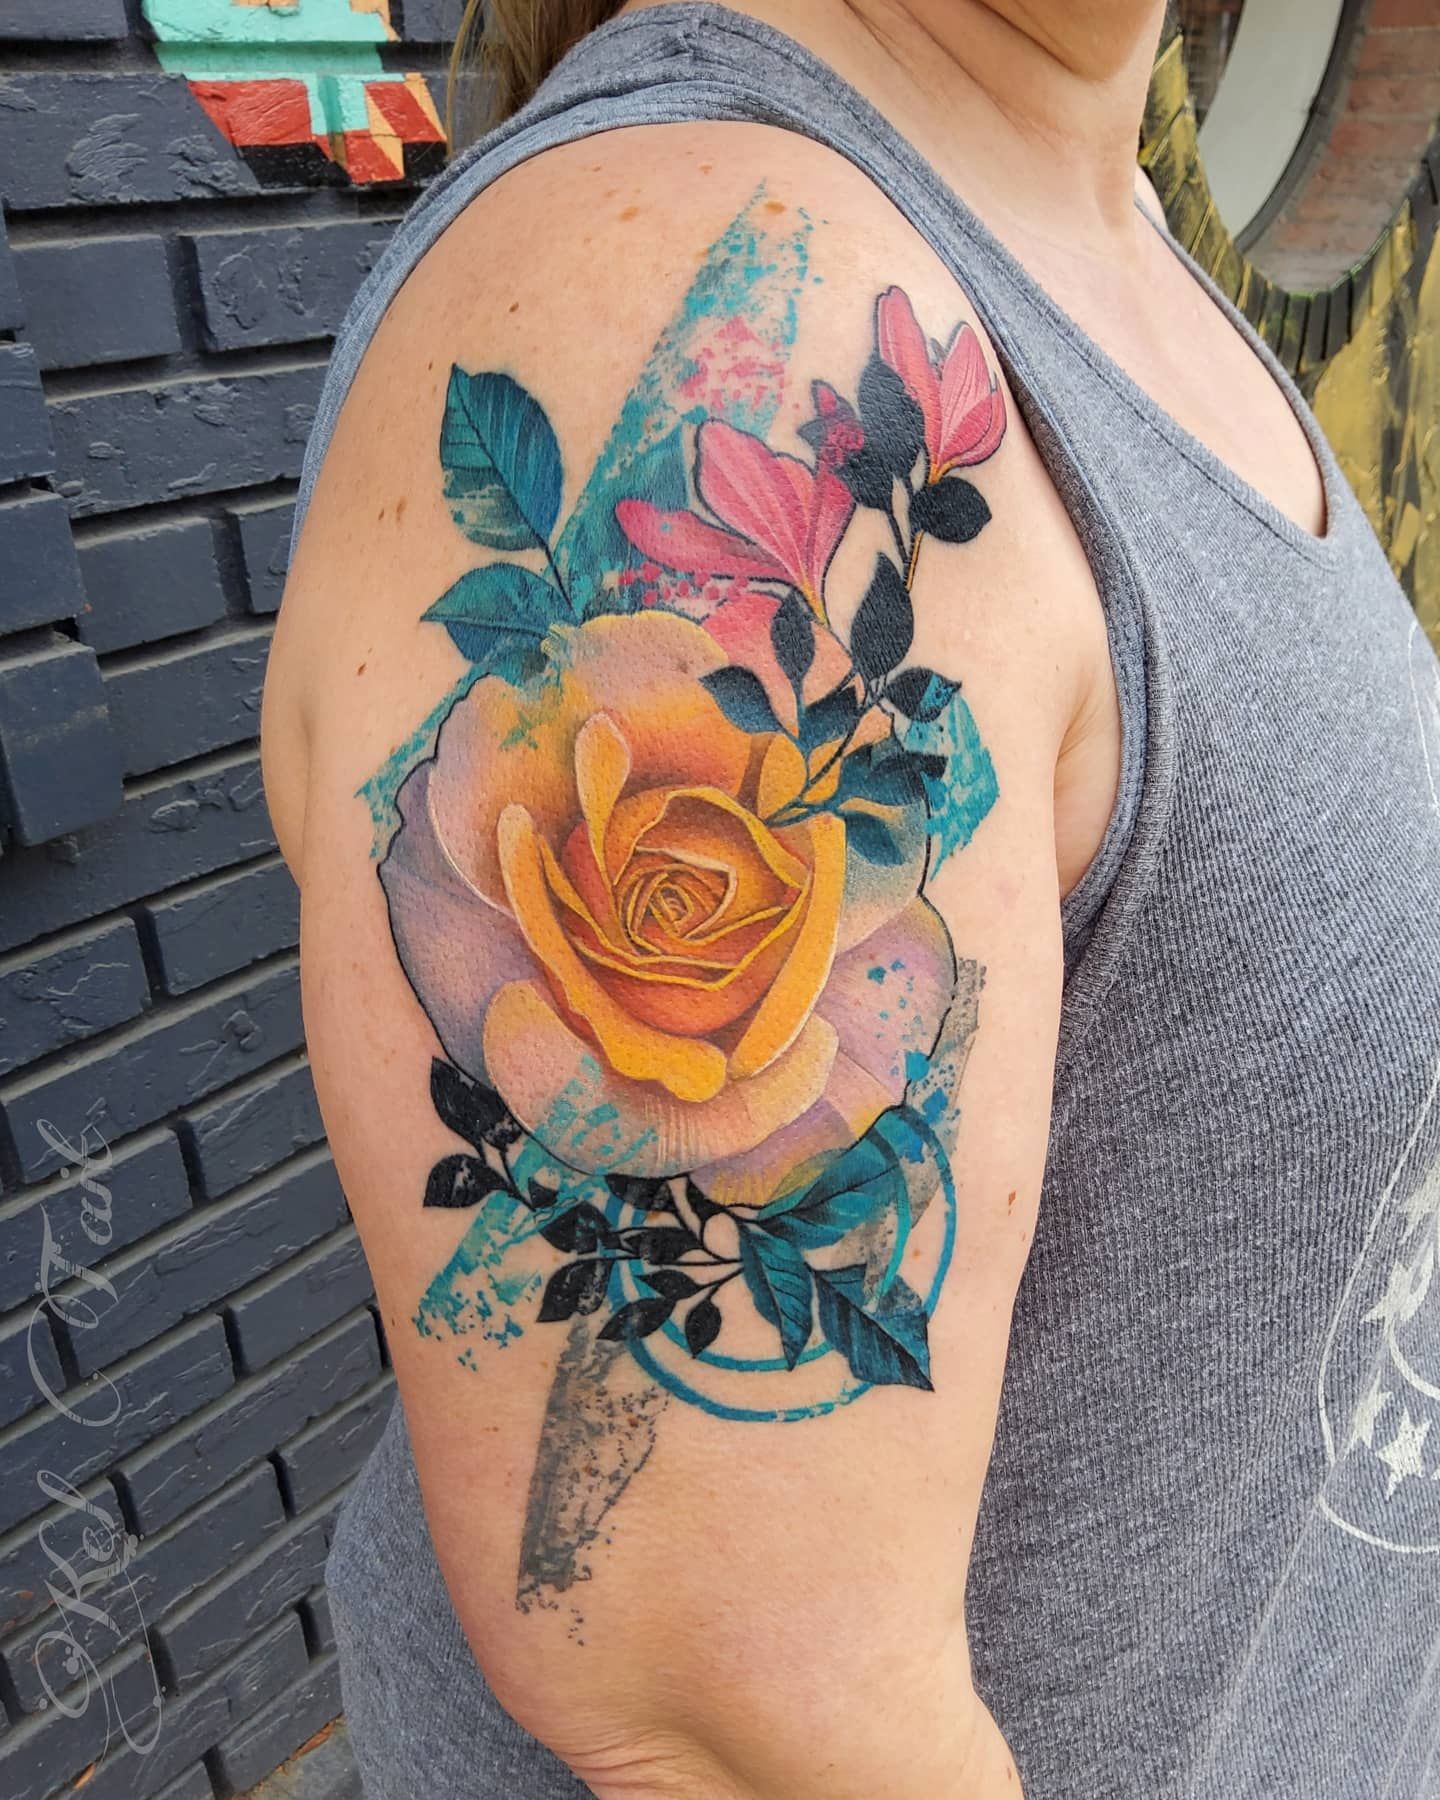 The Top 31 Yellow Rose Tattoo Ideas  2021 Inspiration Guide Video  Video  Yellow rose tattoos Rose tattoos Rose tattoos for men